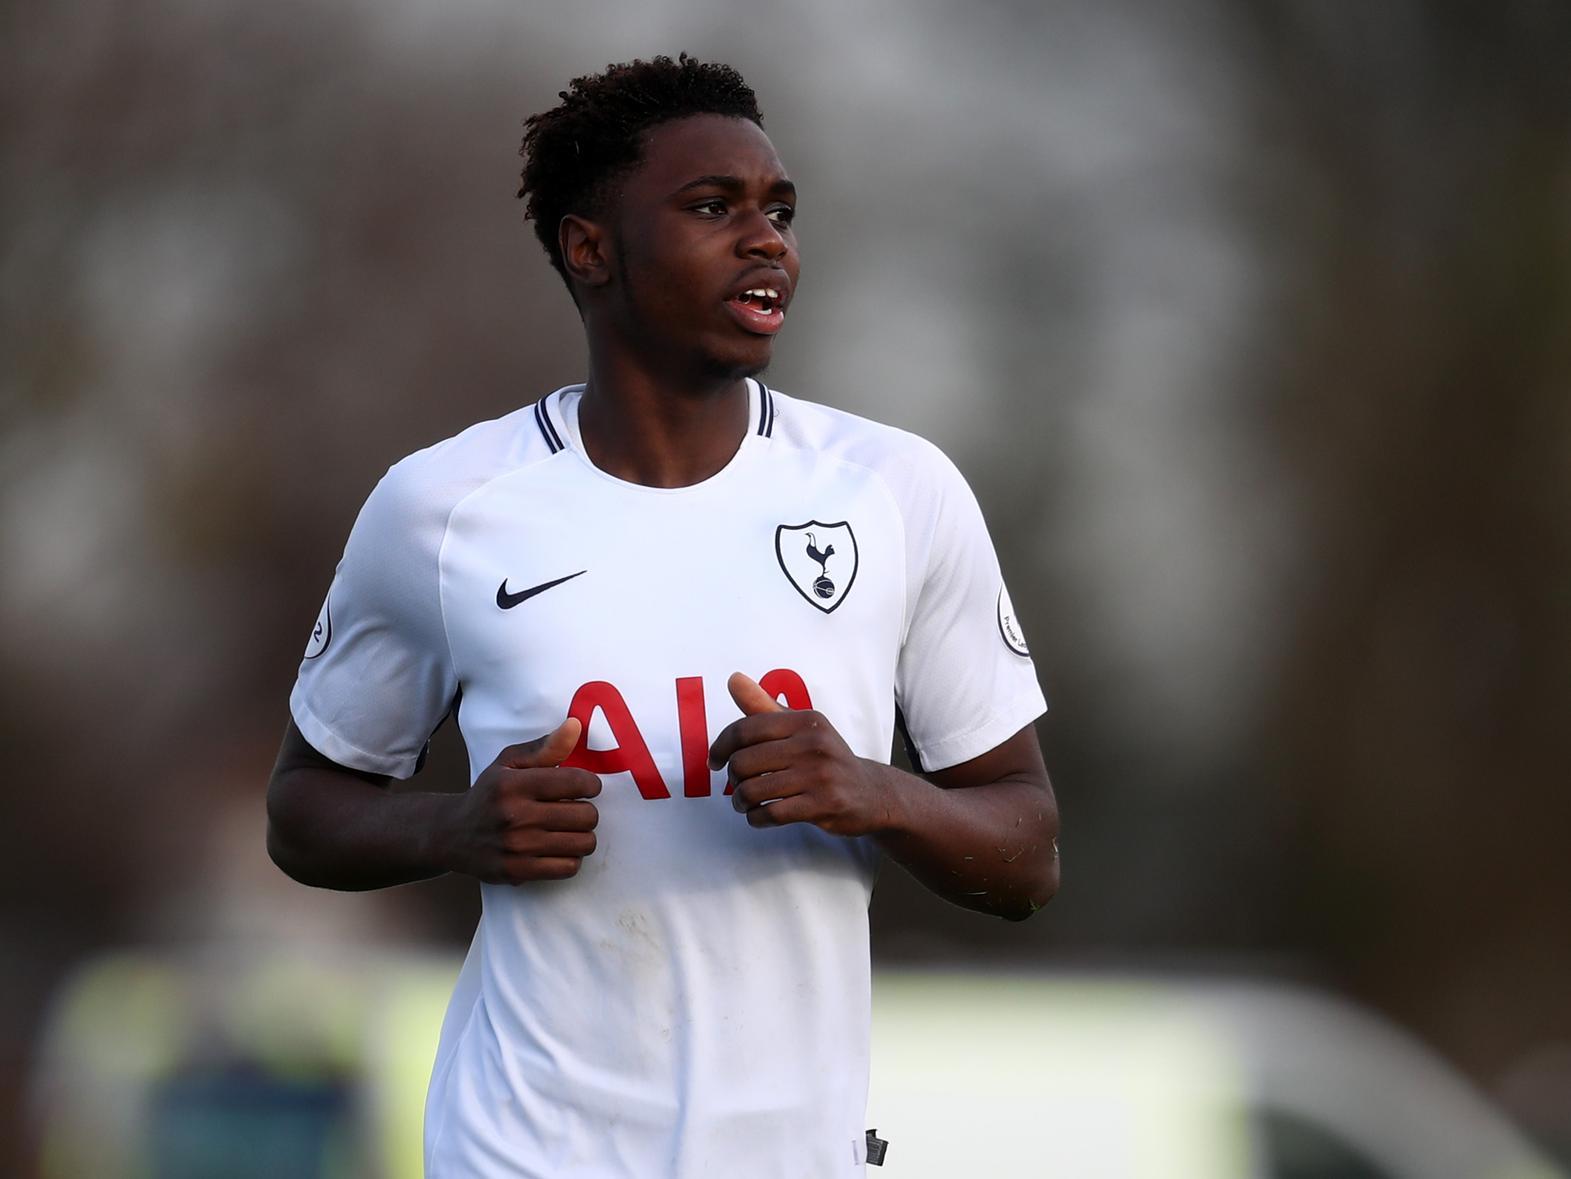 Queens Park Rangers are moving closer to securingSpurs starlet Jonathan Dinzeyi on a permanent deal, after bringing the England youth international in on a trial. (West London Sport)